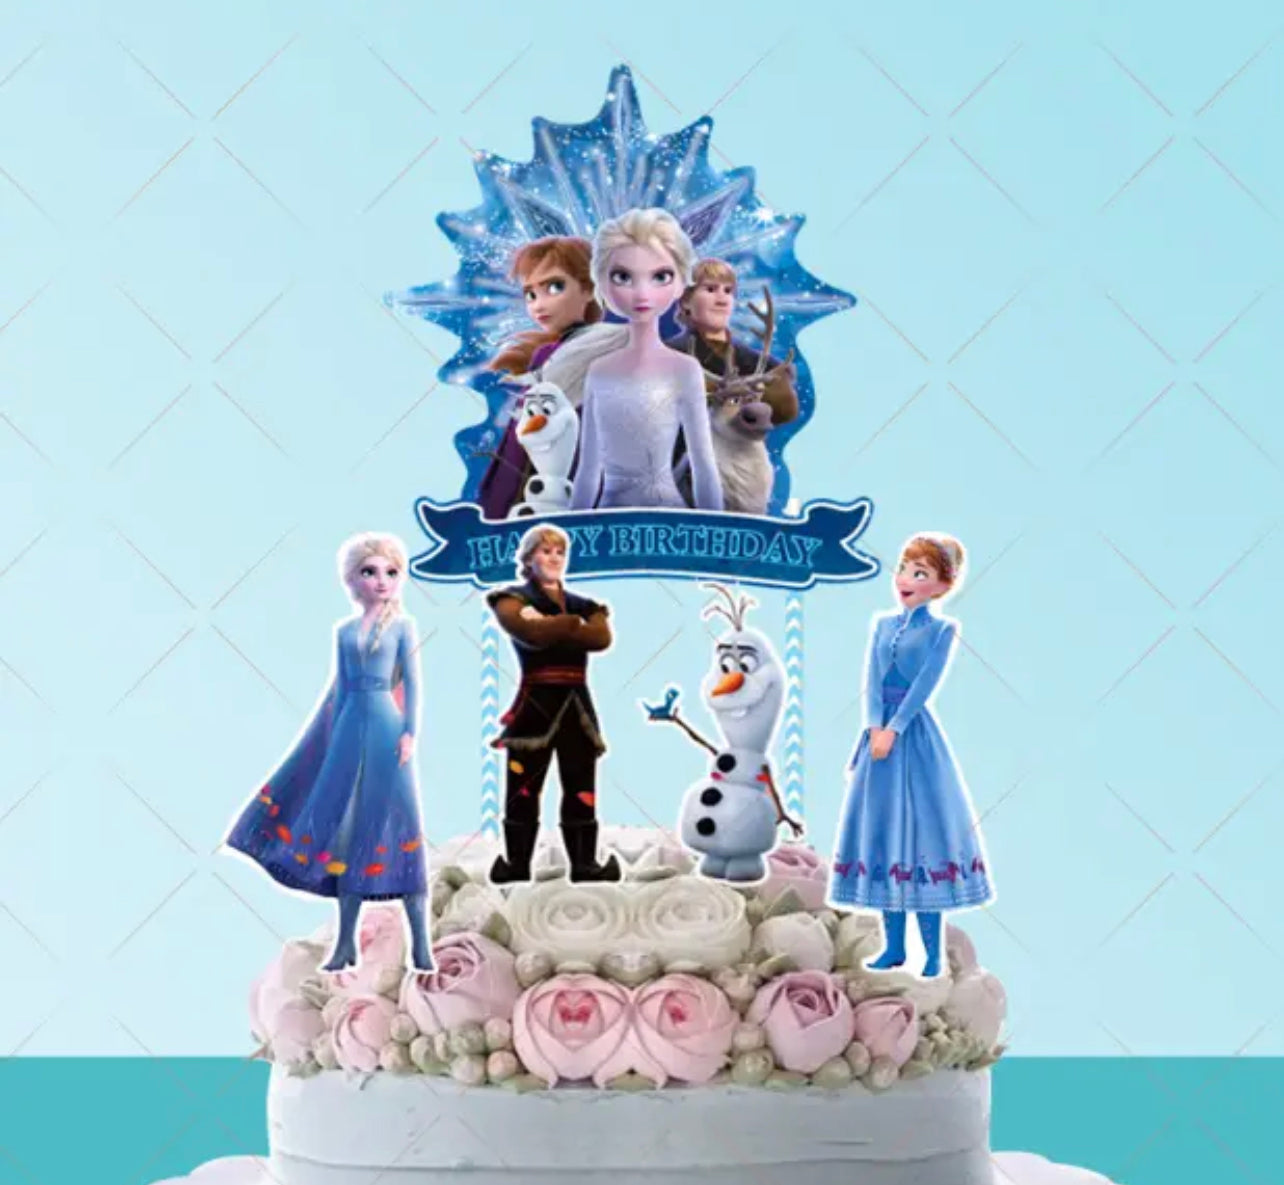 Customised & Themed Cartoon Character Cake Toppers